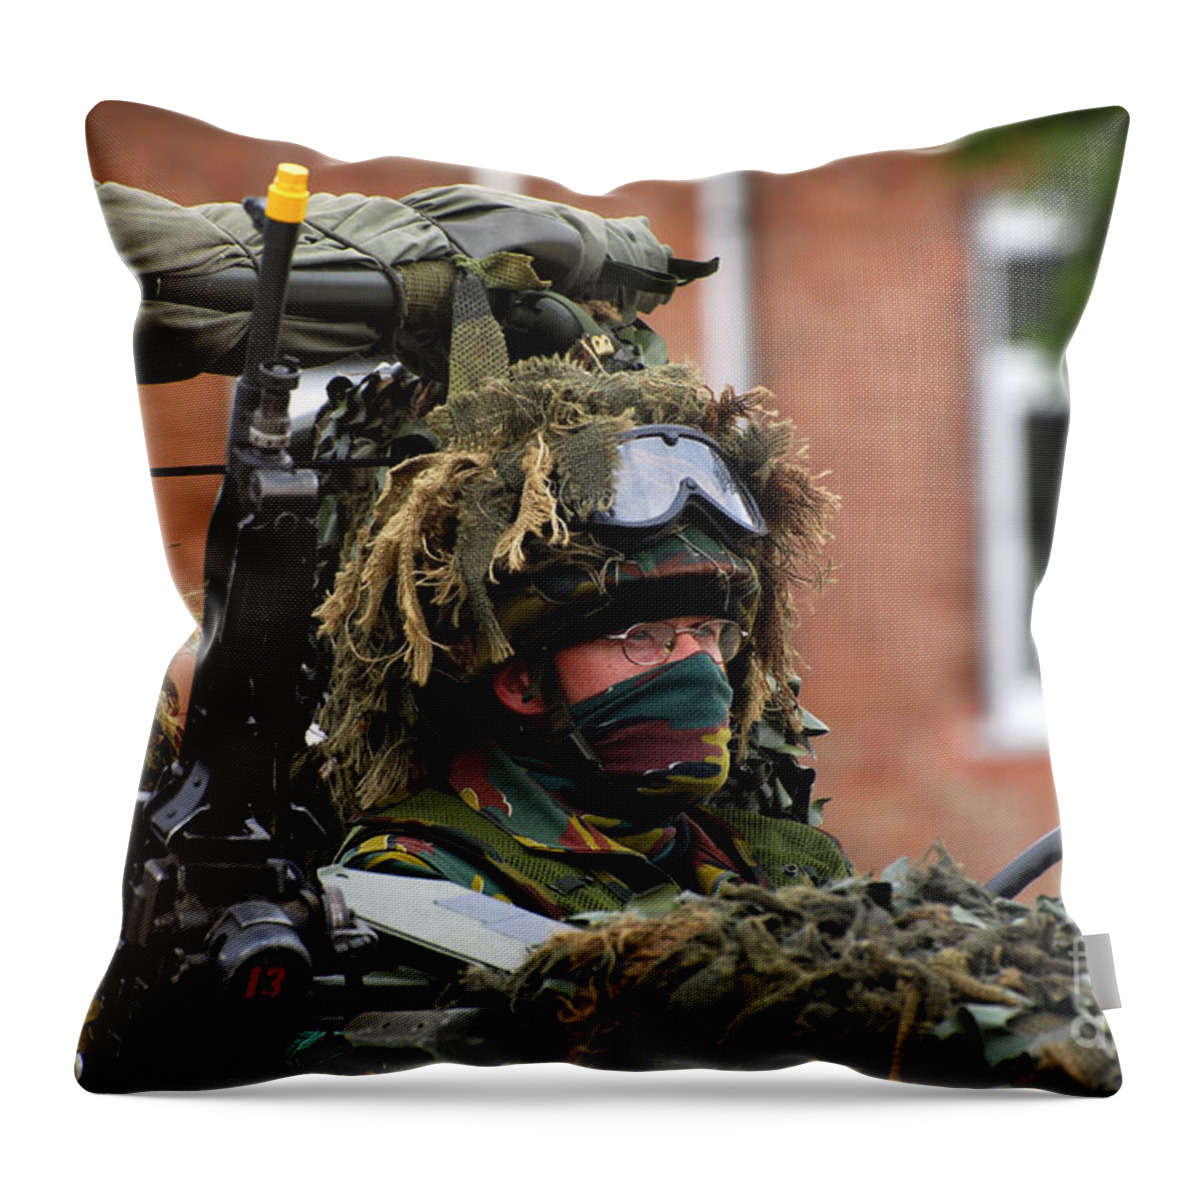 Armed Forces Throw Pillow featuring the photograph Members Of A Recce Or Scout Team #3 by Luc De Jaeger